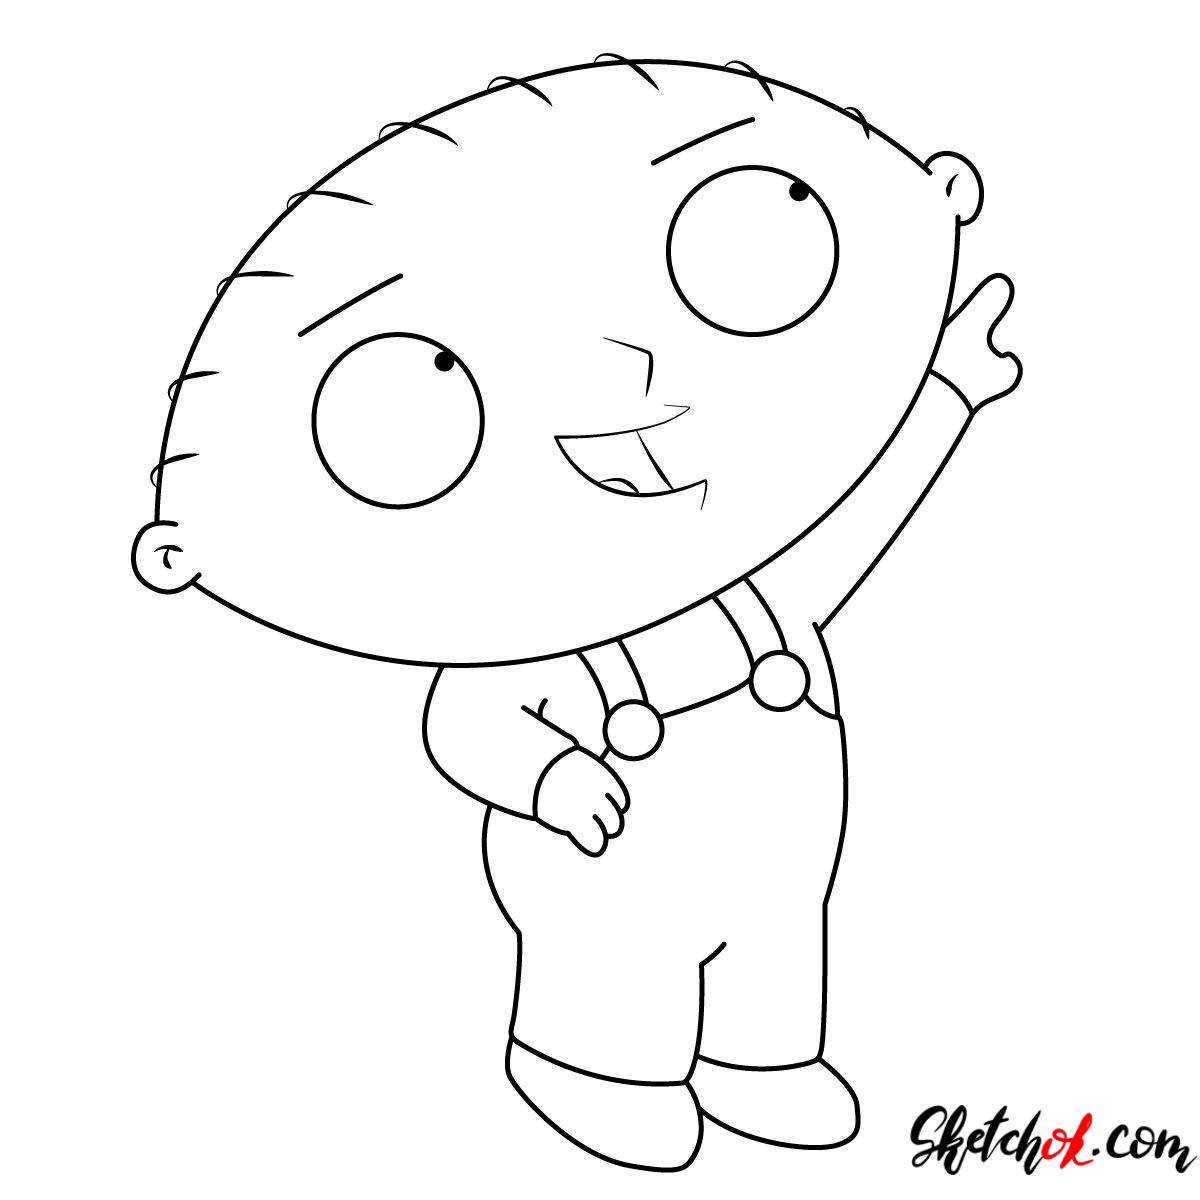 How to draw Stewie Griffin - step 09